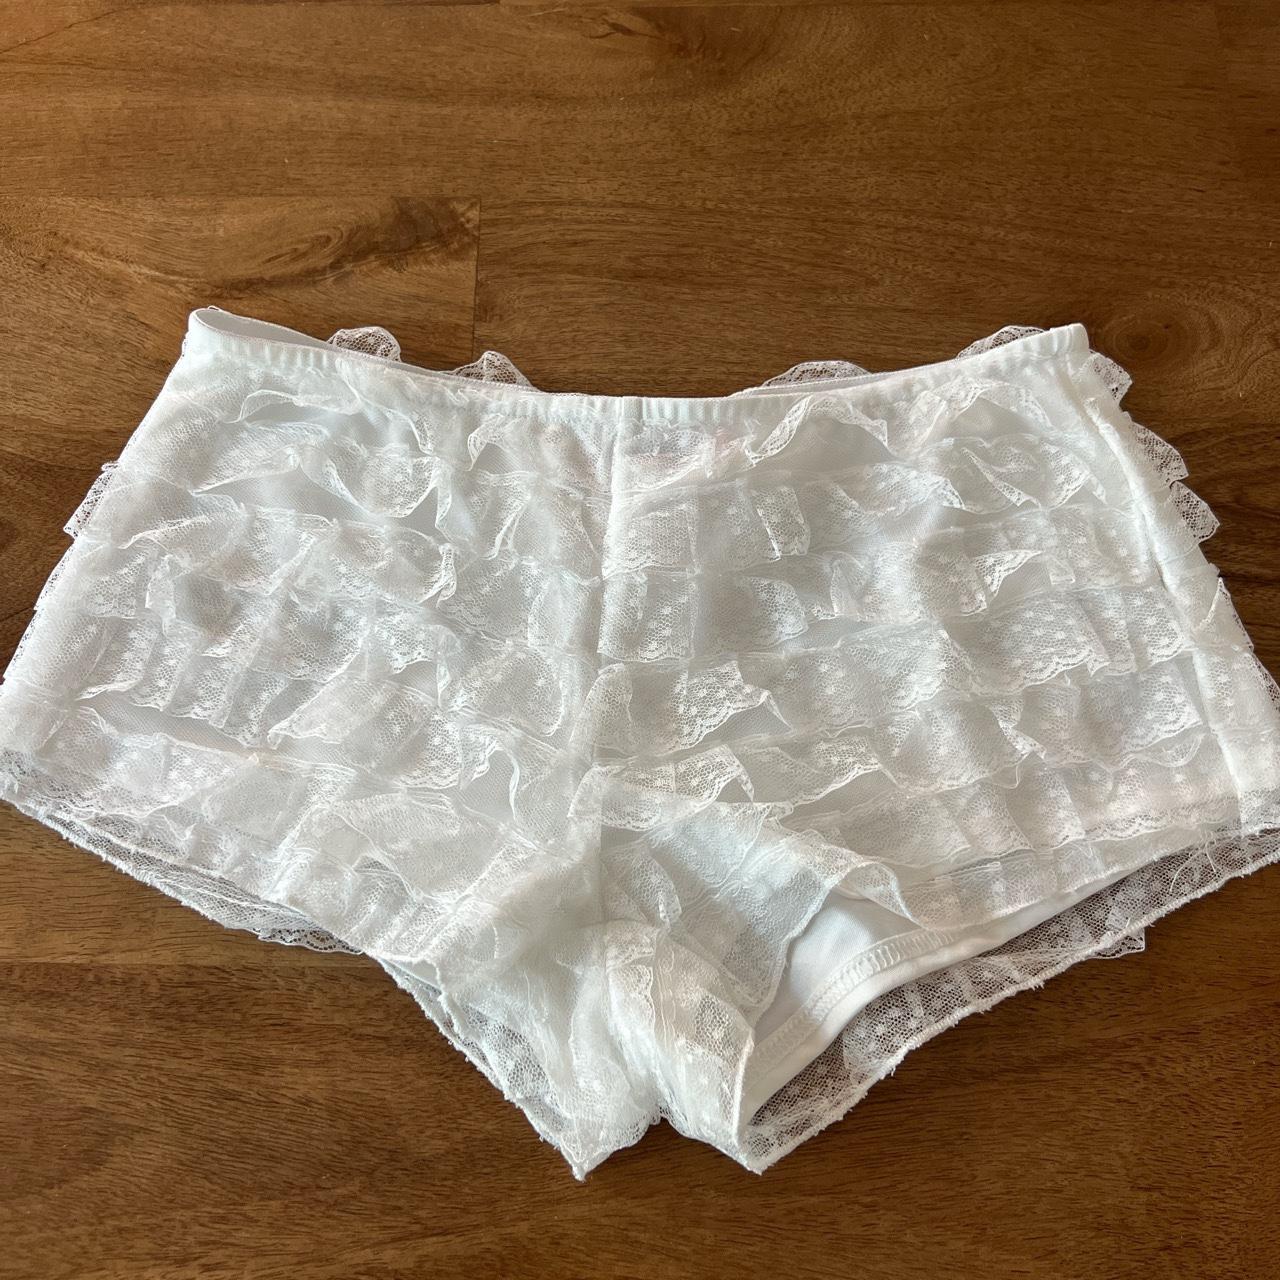 white lace short bloomers size small #bloomers... - Depop